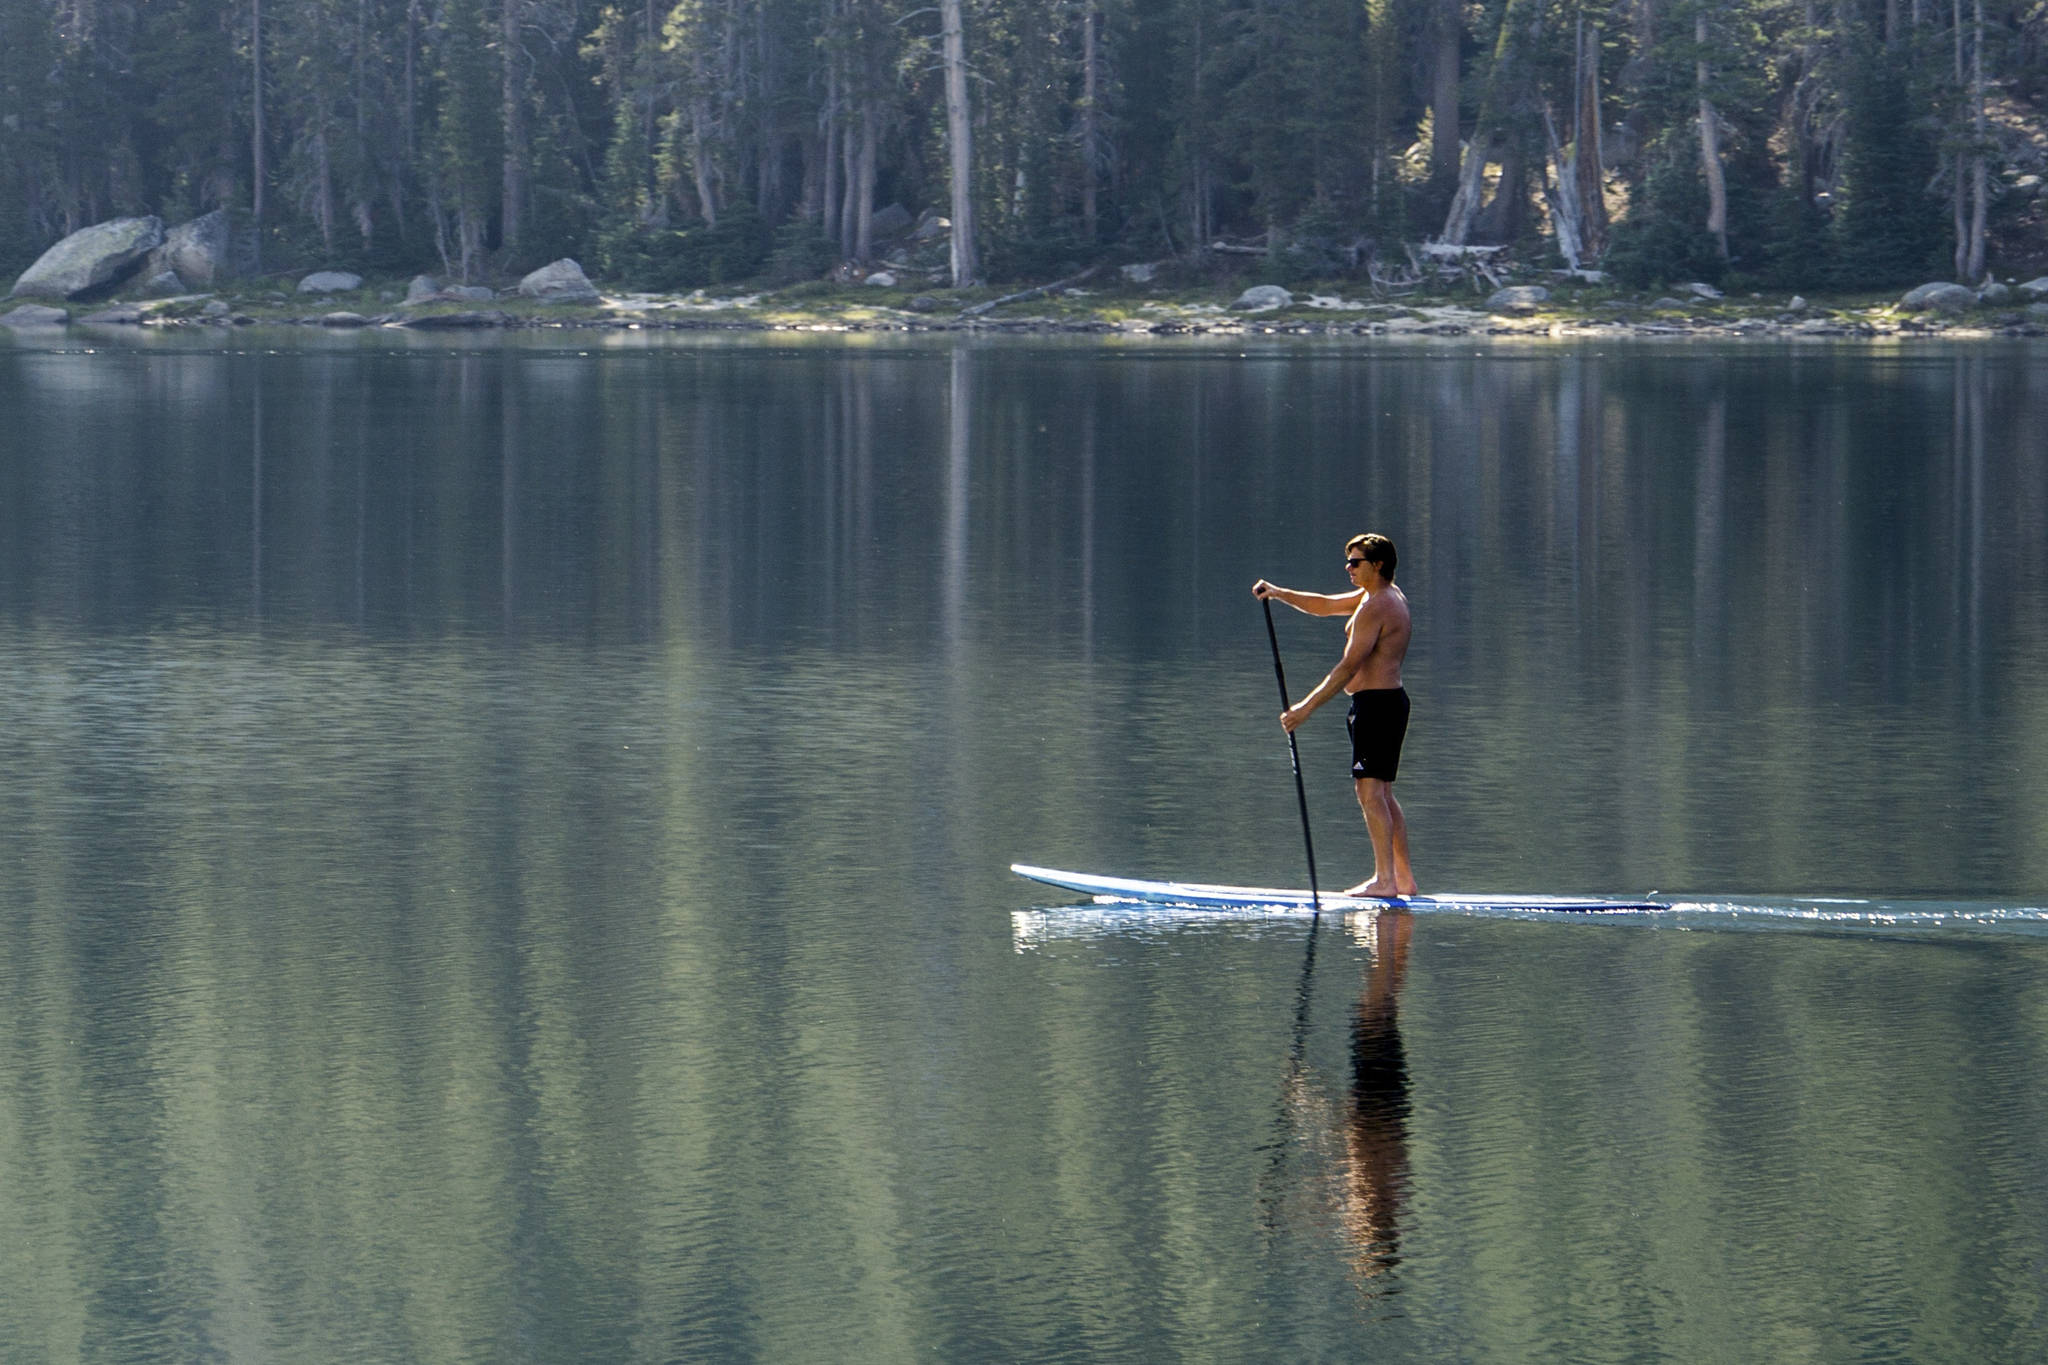 All riders fo stand up paddleboards should wear a life jacket to save them from drowning should they fall in. (Contributed<em> photo)</em>